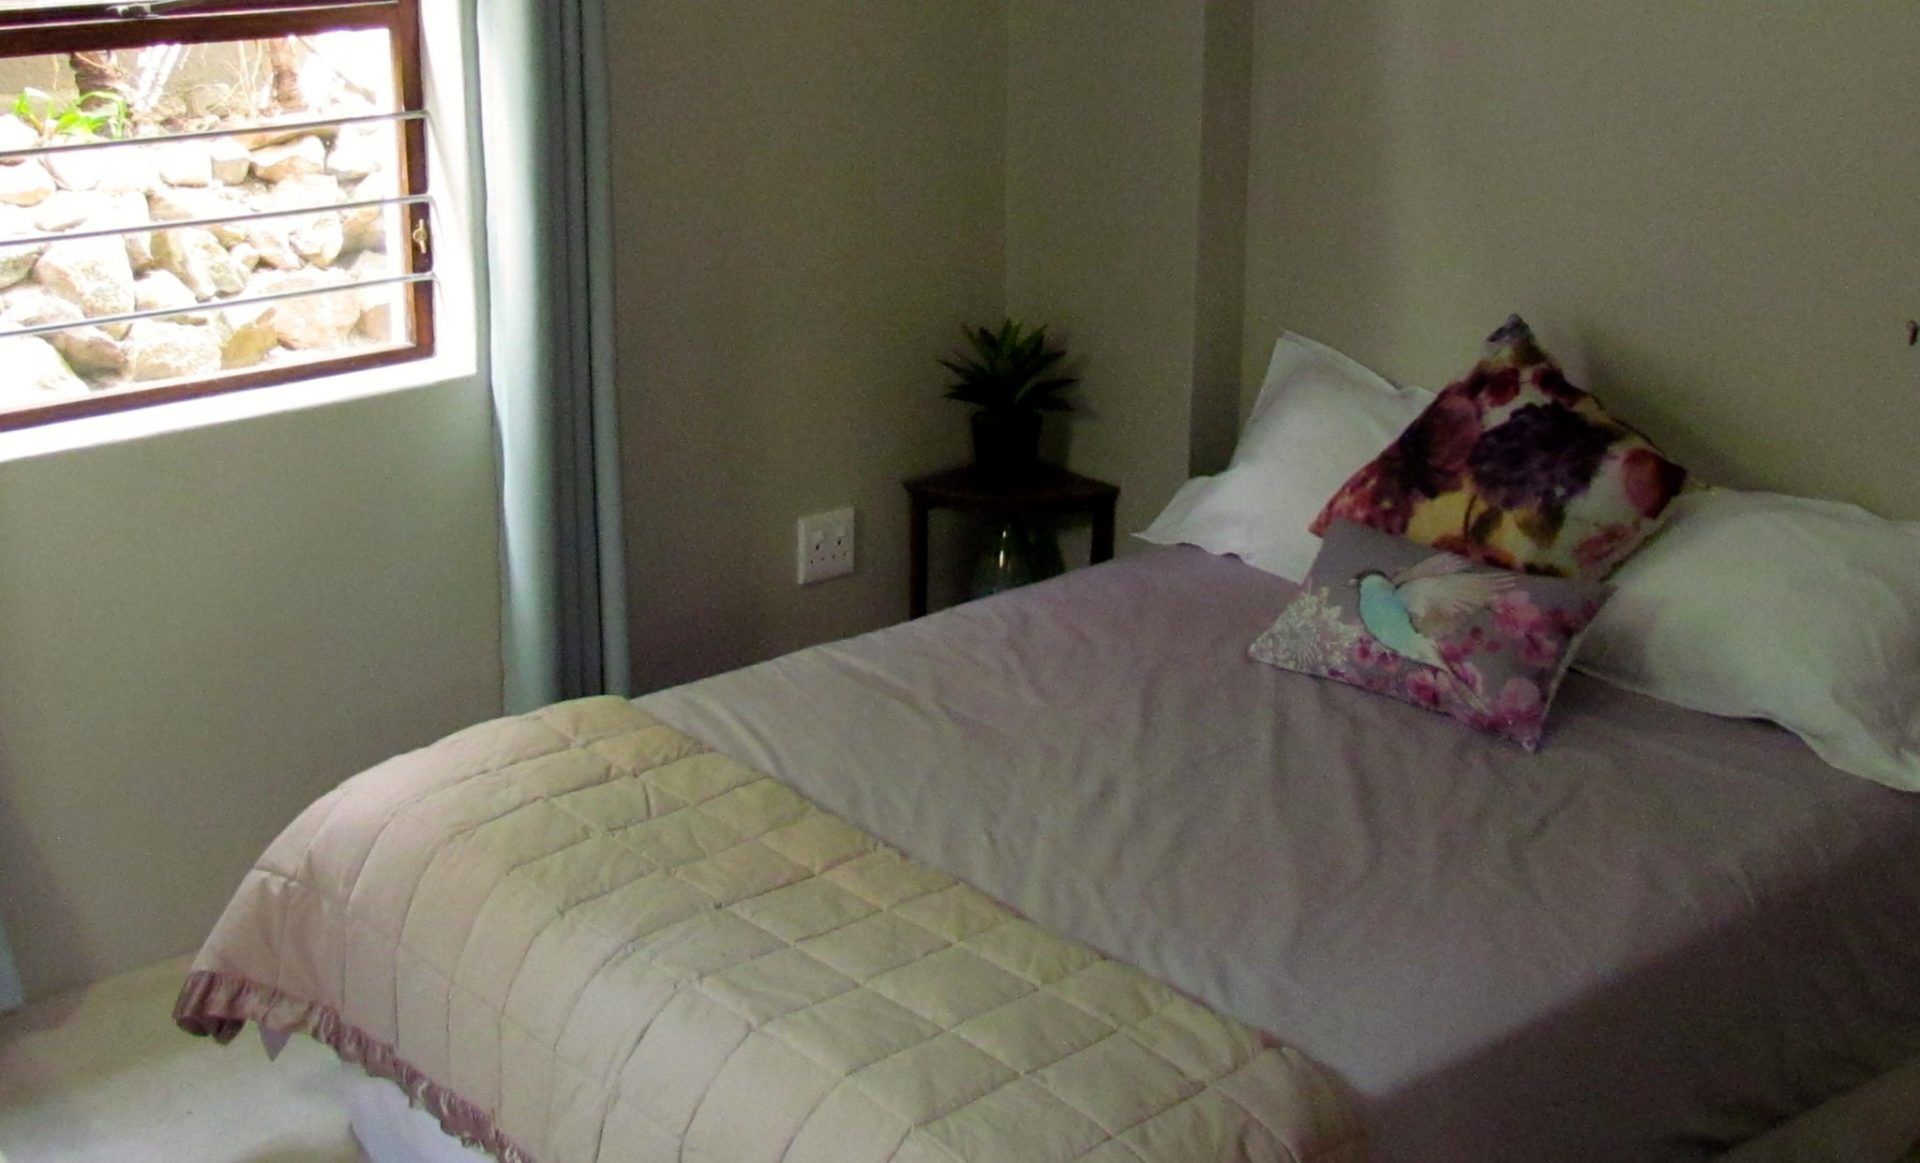 Photo 8 of The Loft accommodation in Camps Bay, Cape Town with 2 bedrooms and 1 bathrooms